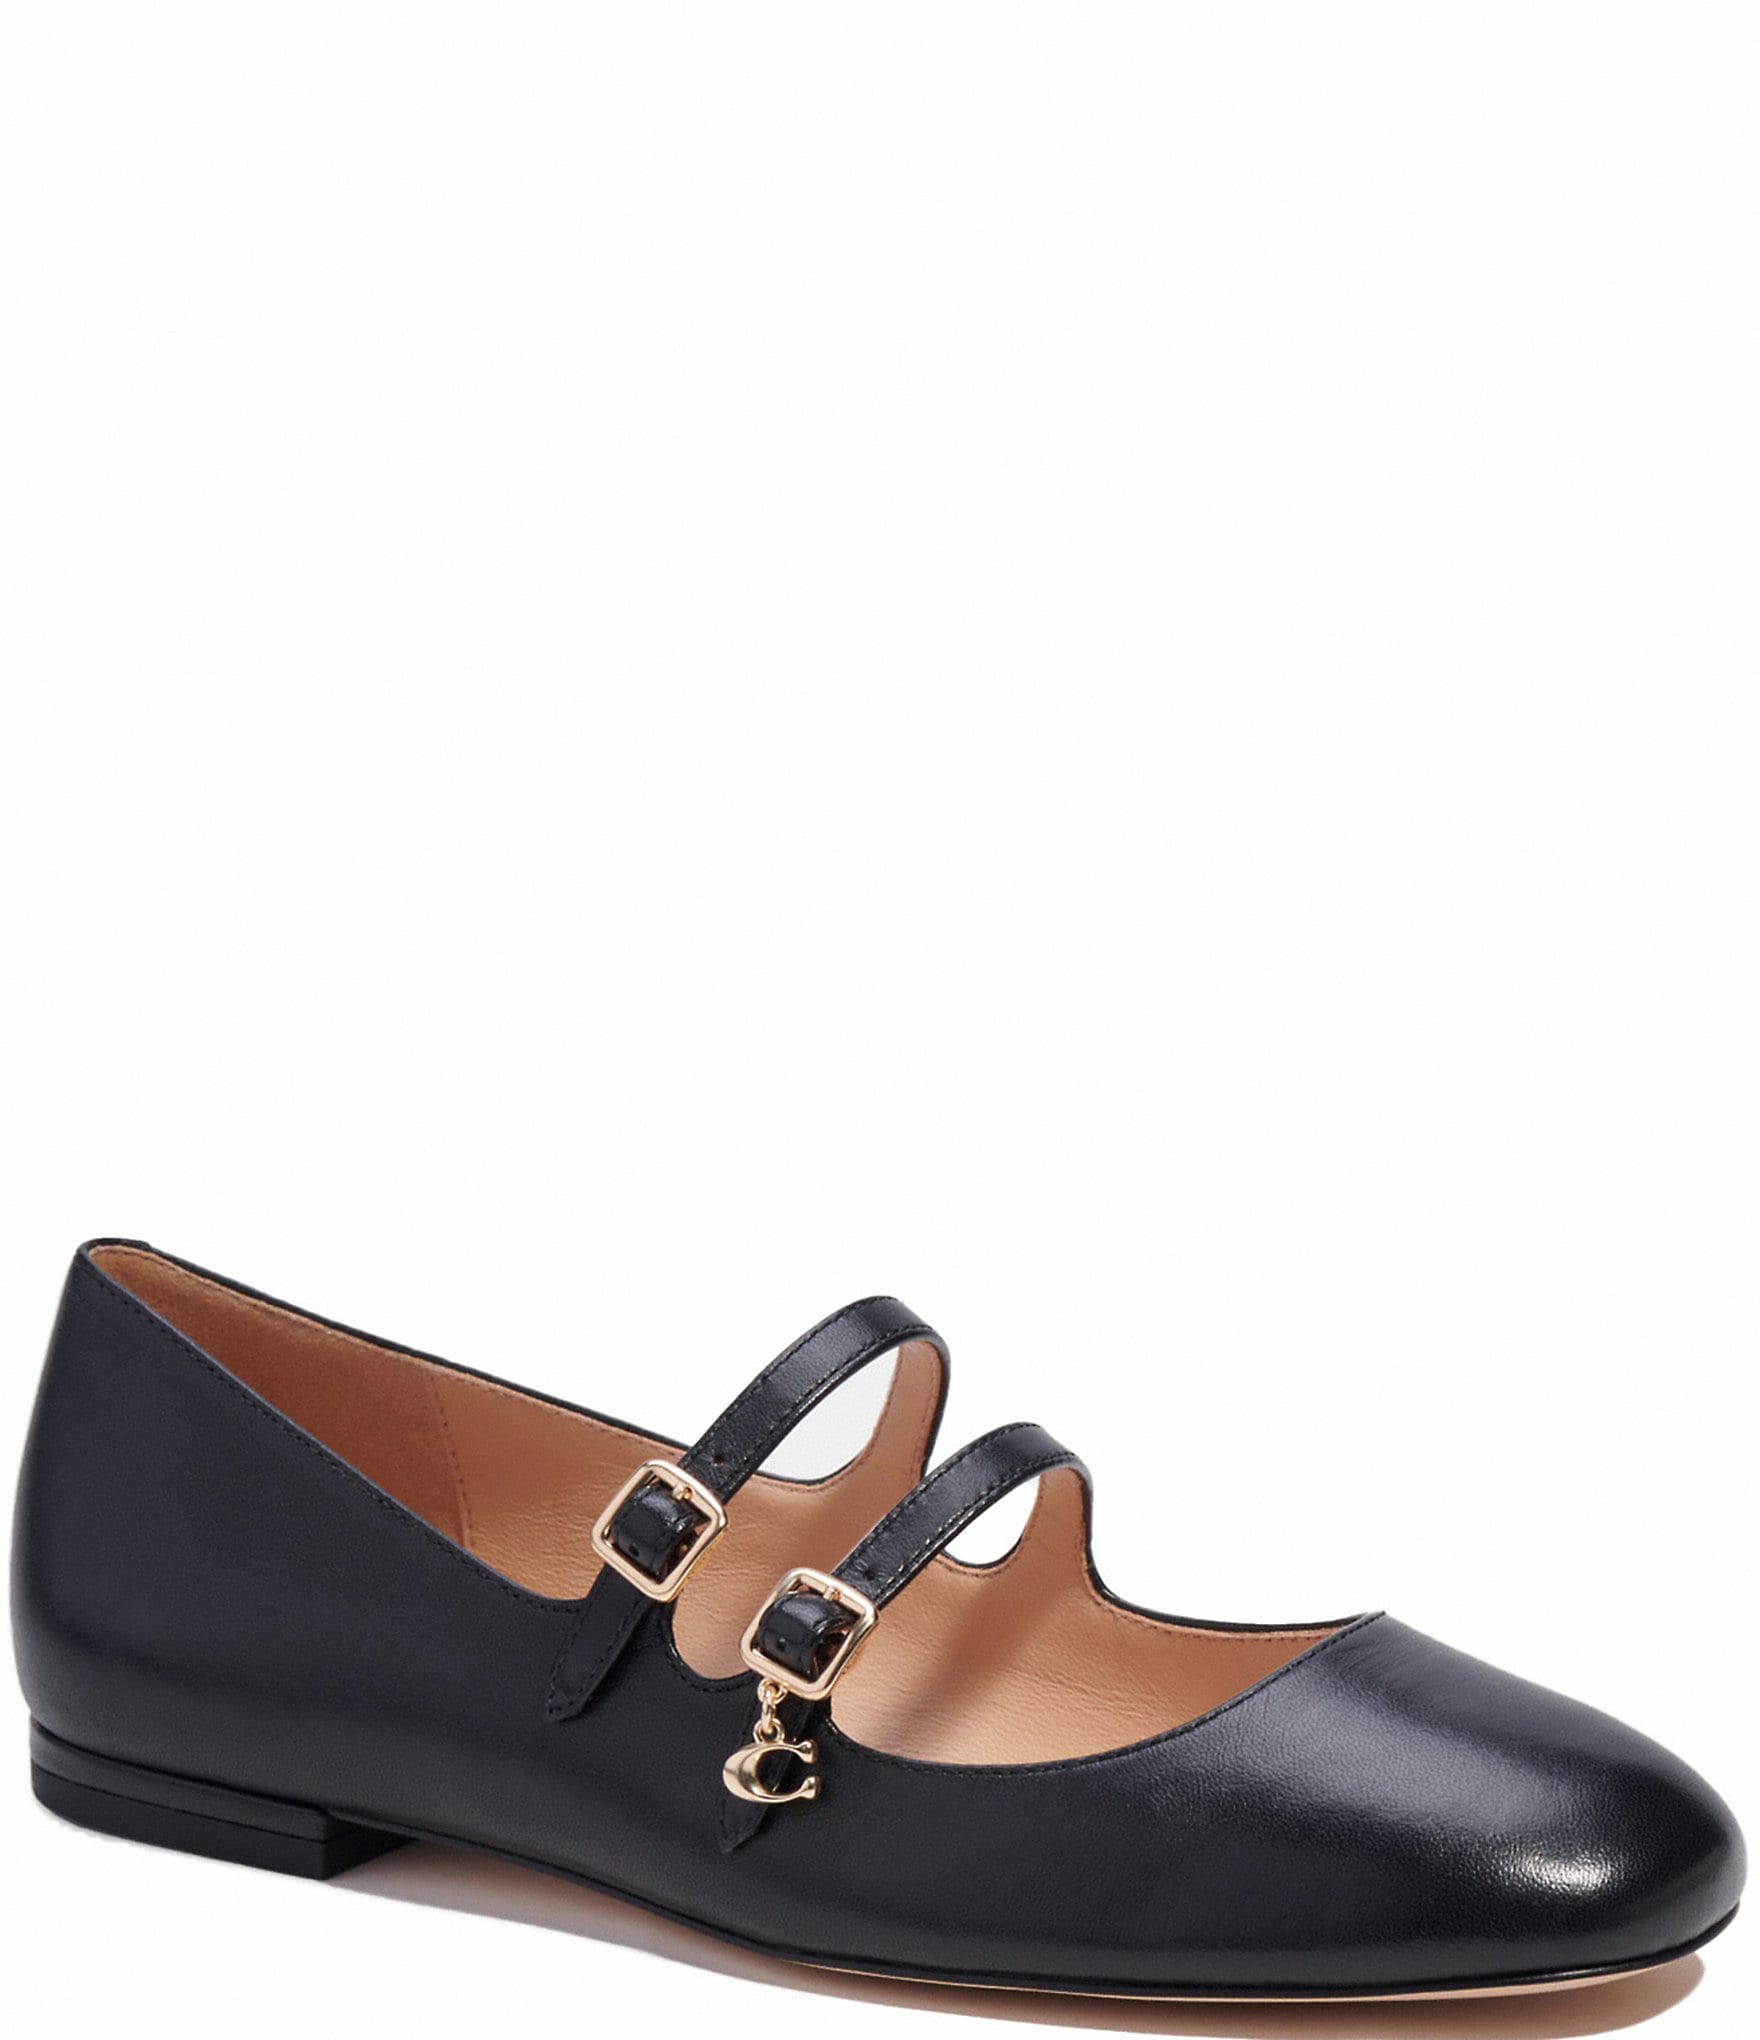 COACH Whitley Leather Double Strap Mary Jane Flats | Dillard's